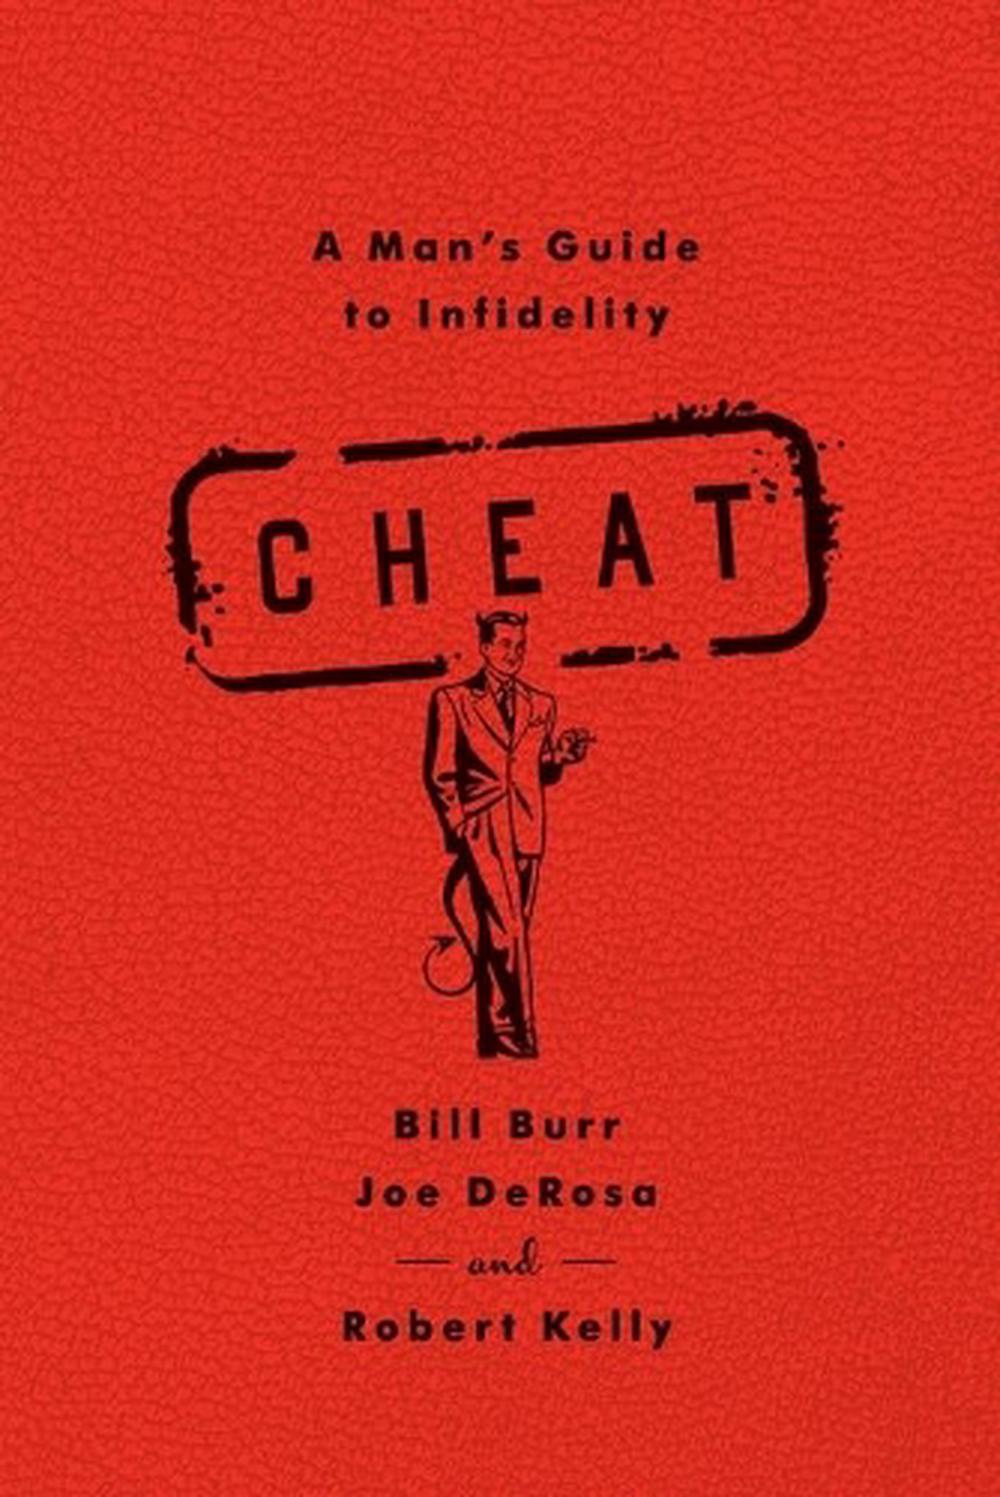 Cheat A Man's Guide to Infidelity by Bill Burr (English) Paperback